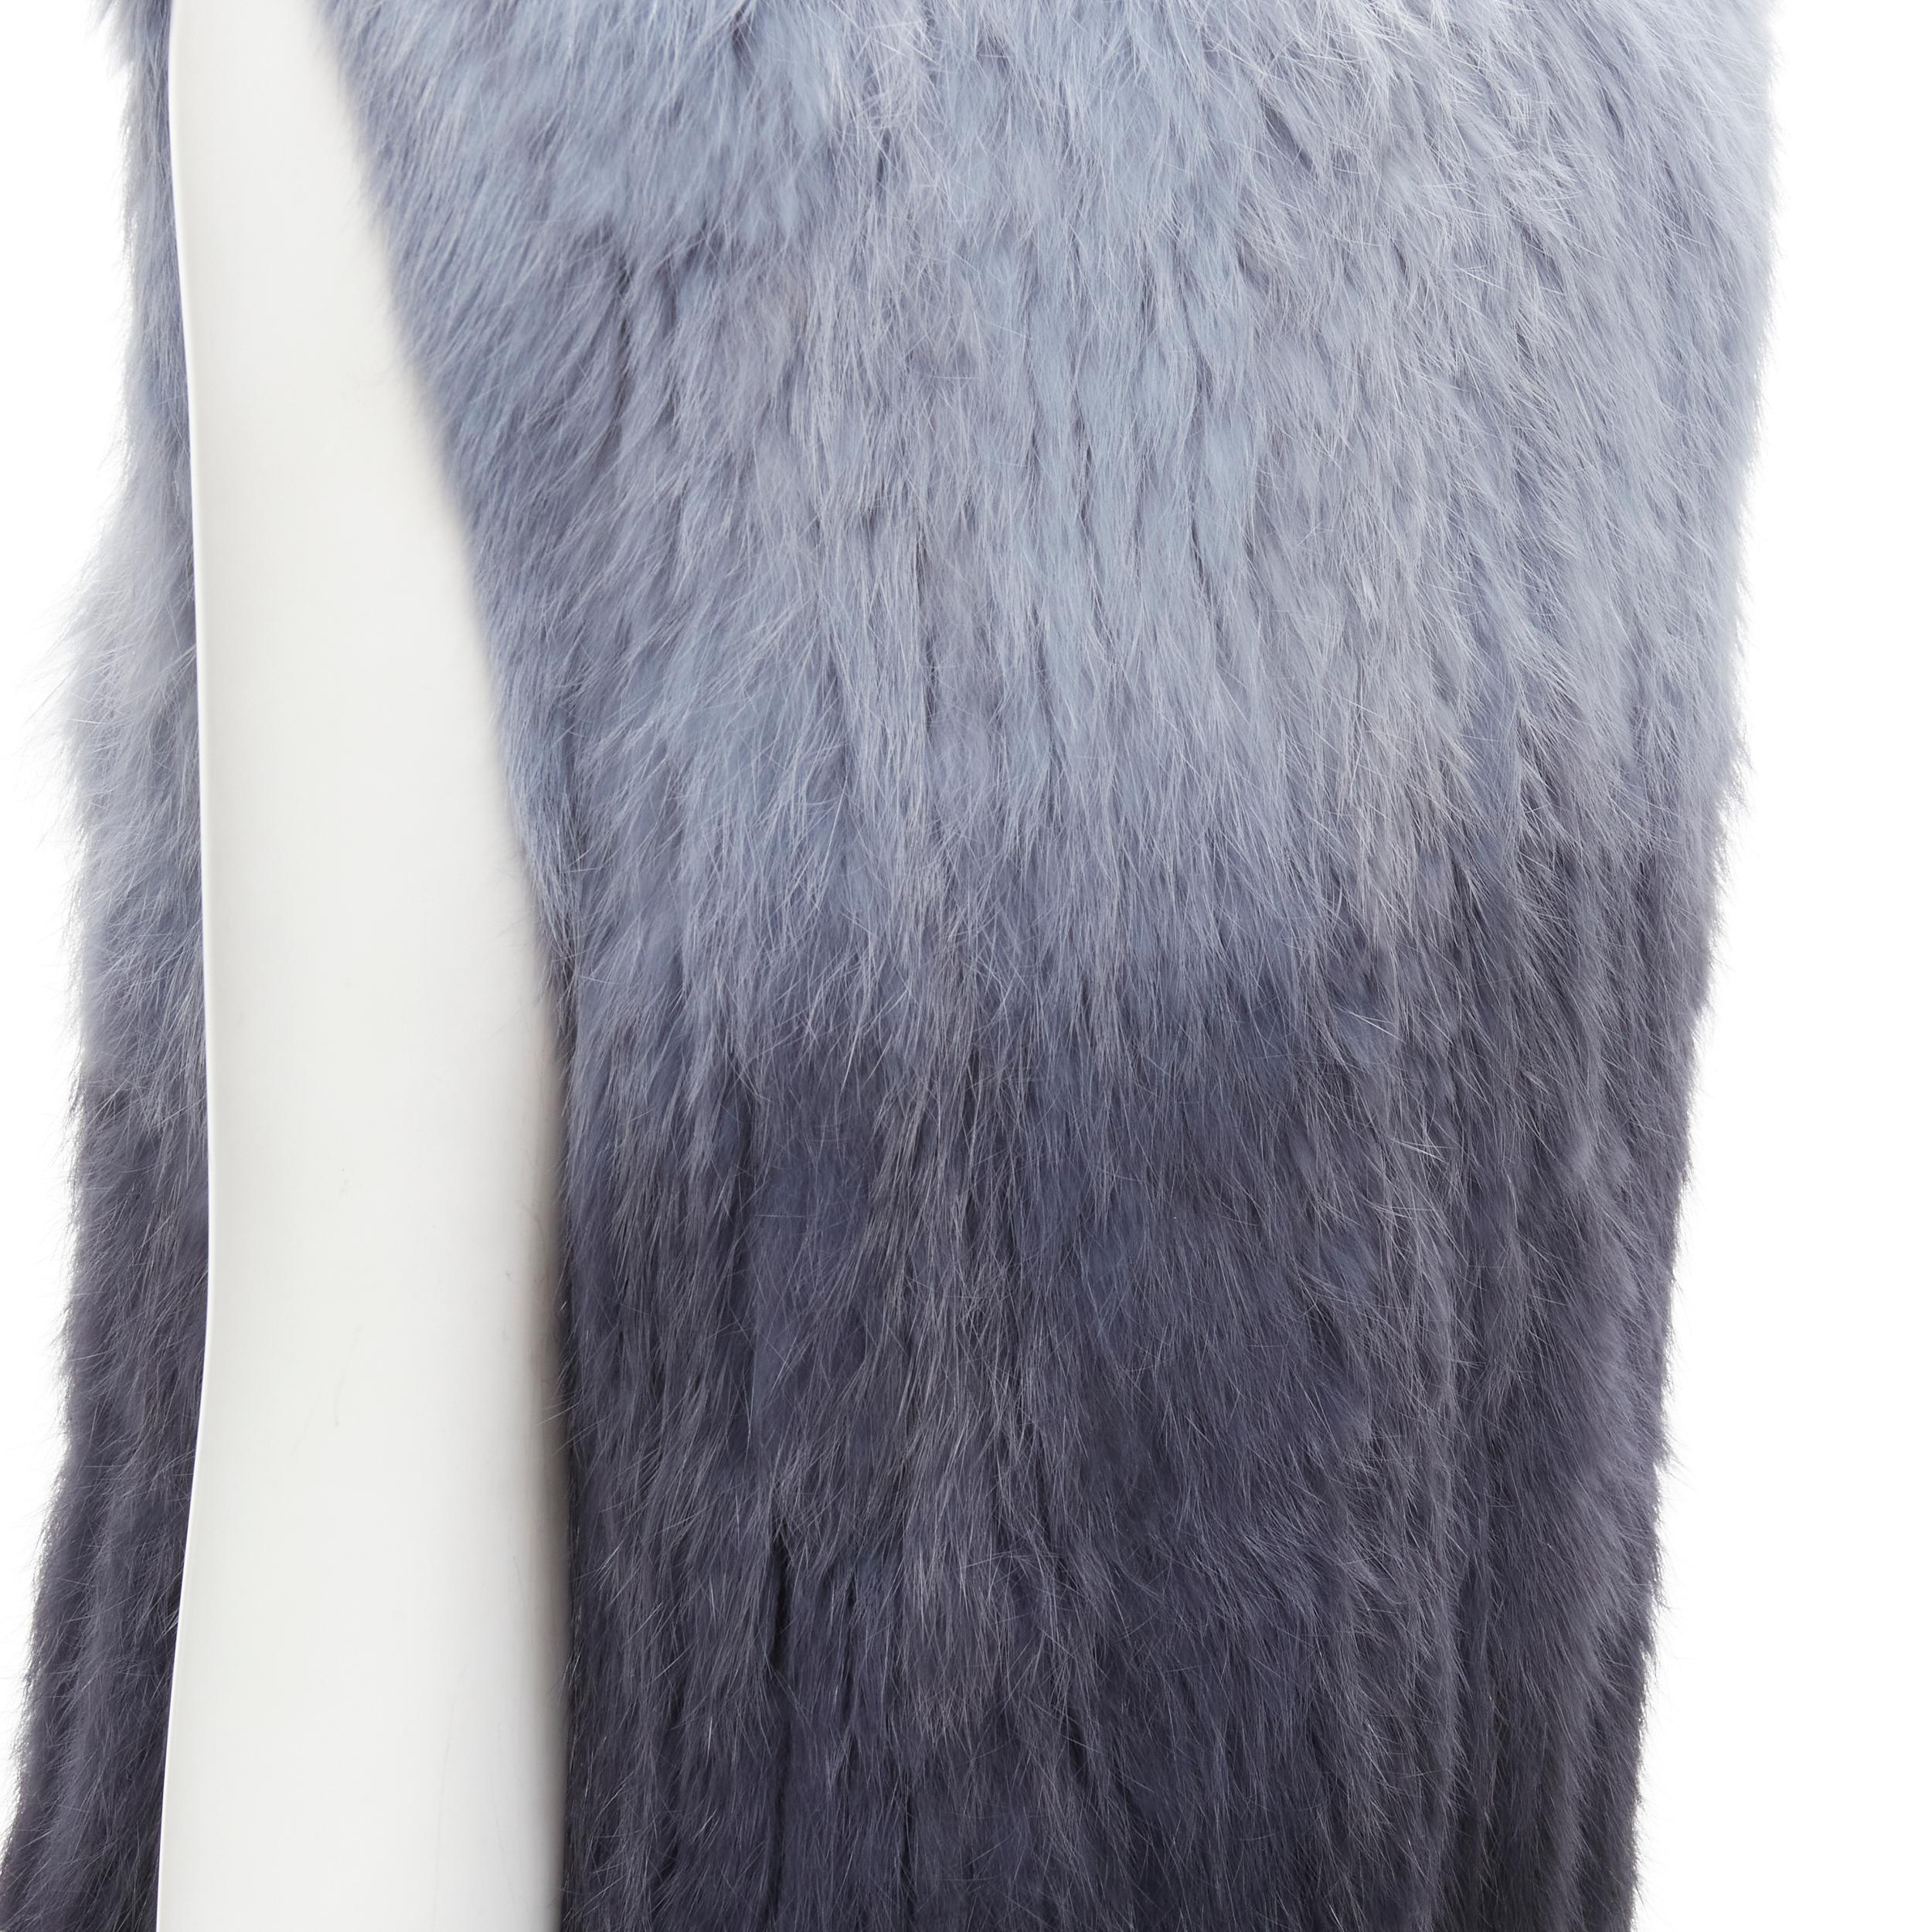 THEORY rabbit fur gradient blue fur vest jacket S
Brand: Theory
Material: Fur
Color: Blue
Pattern: Solid
Closure: Hook & Eye
Extra Detail: Genuine rabbit fur. Hook eye closure. Dual side seam pockets.
Made in: China

CONDITION:
Condition: Excellent,